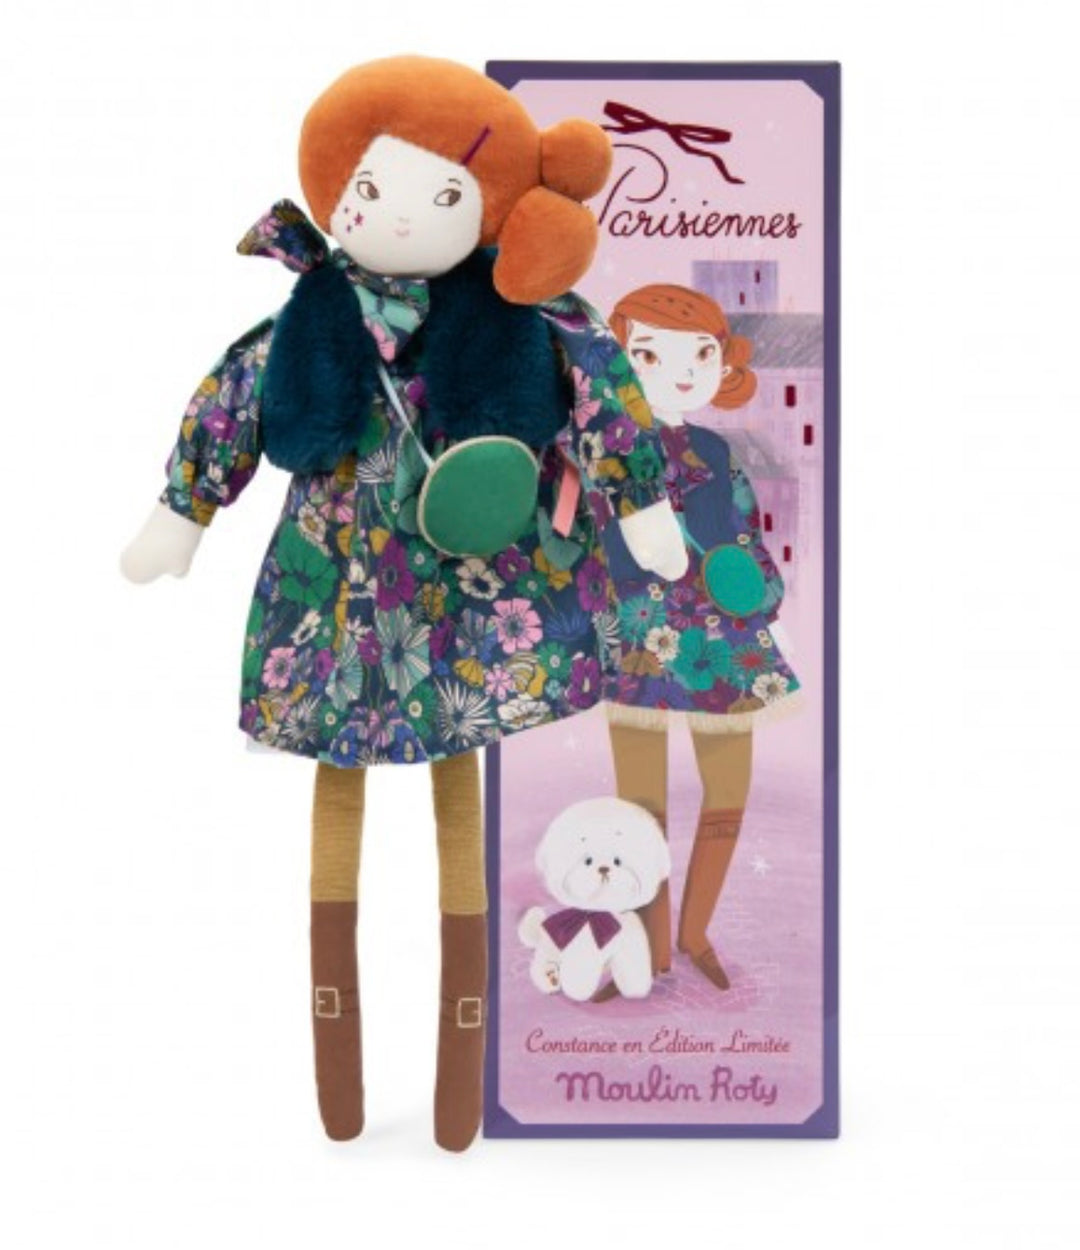 Madame Constance Les Parisiennes Limited Edition-Moulin Roty